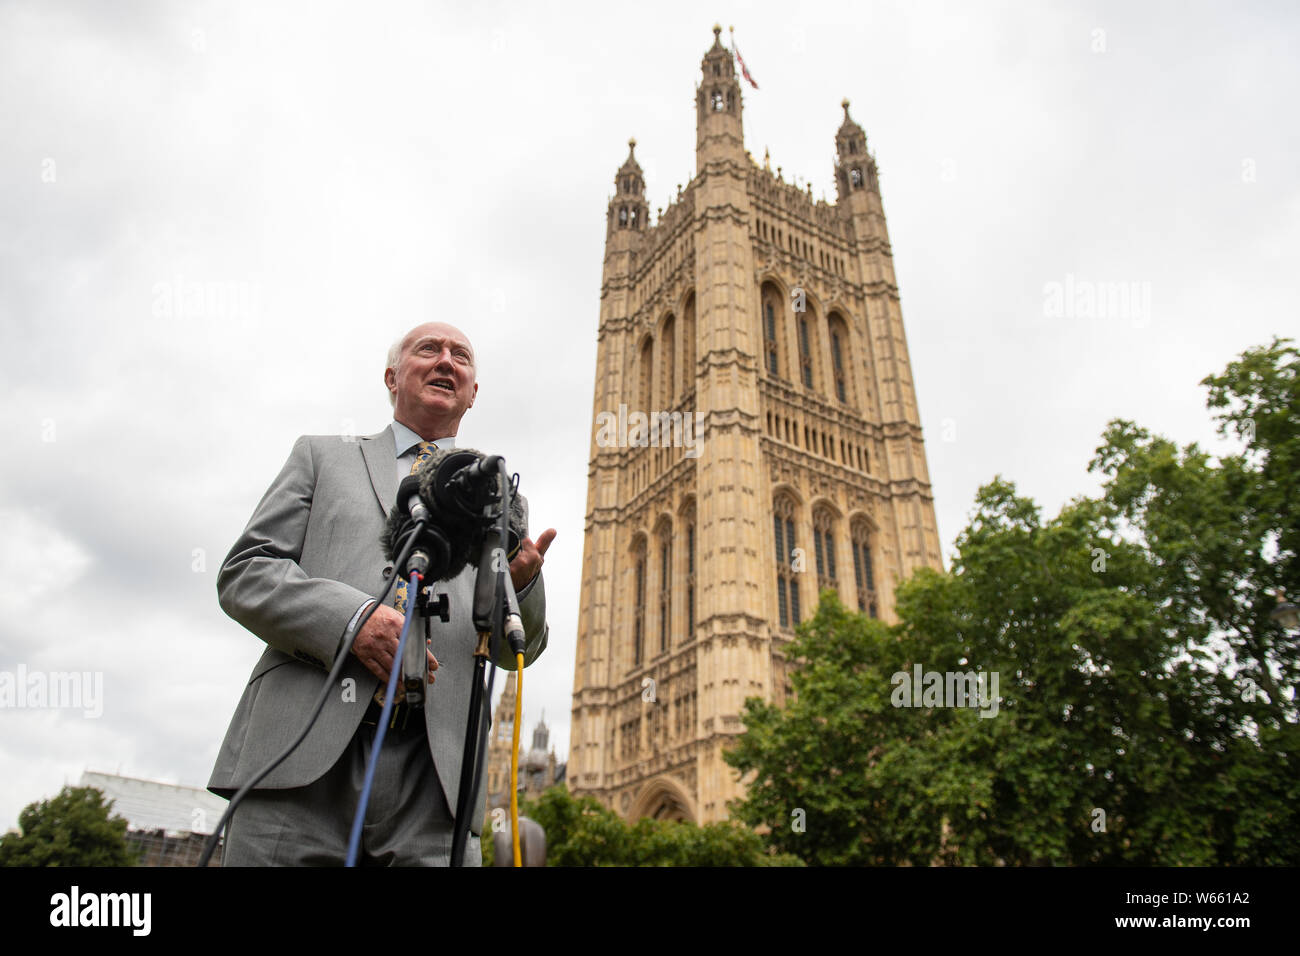 Peter Lawrence, the father of missing Claudia Lawrence, speaks at a press conference in Westminster, London, as Claudia's Law comes into effect. The law, named after the missing chef who has not been seen since March 18 2009, was introduced to help families take over the affairs of loved ones who have disappeared. Stock Photo